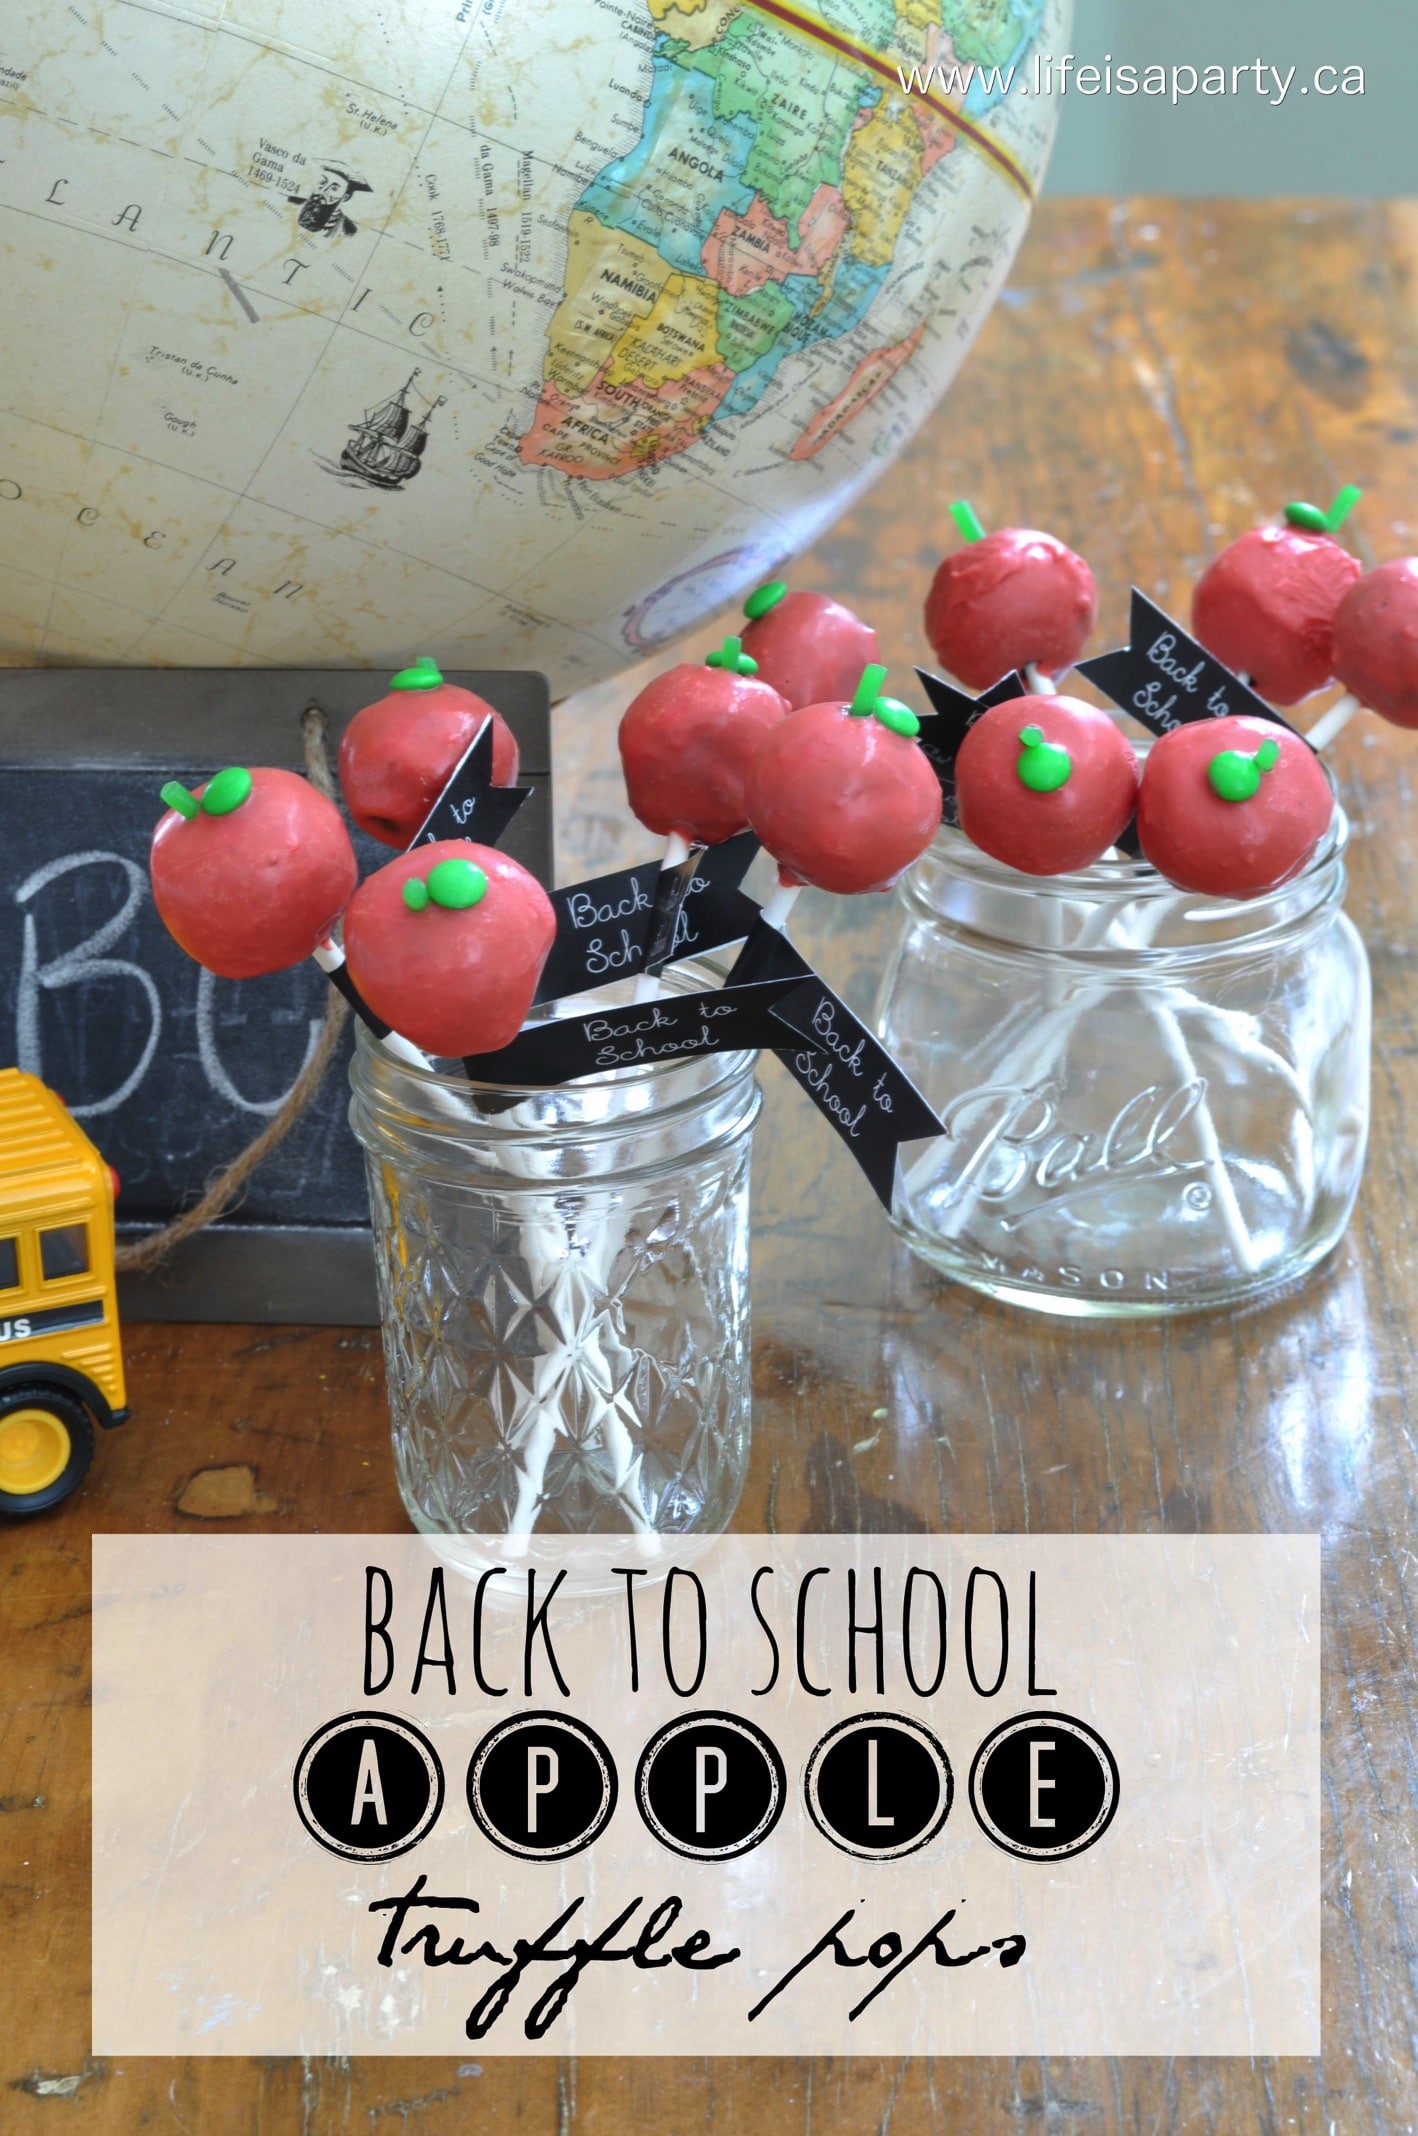 Back to School Treats Apple Truffle Pops -chocolate truffle centres, dipped in red chocolate and decorated with liquorice stems and mini M&M leaves.